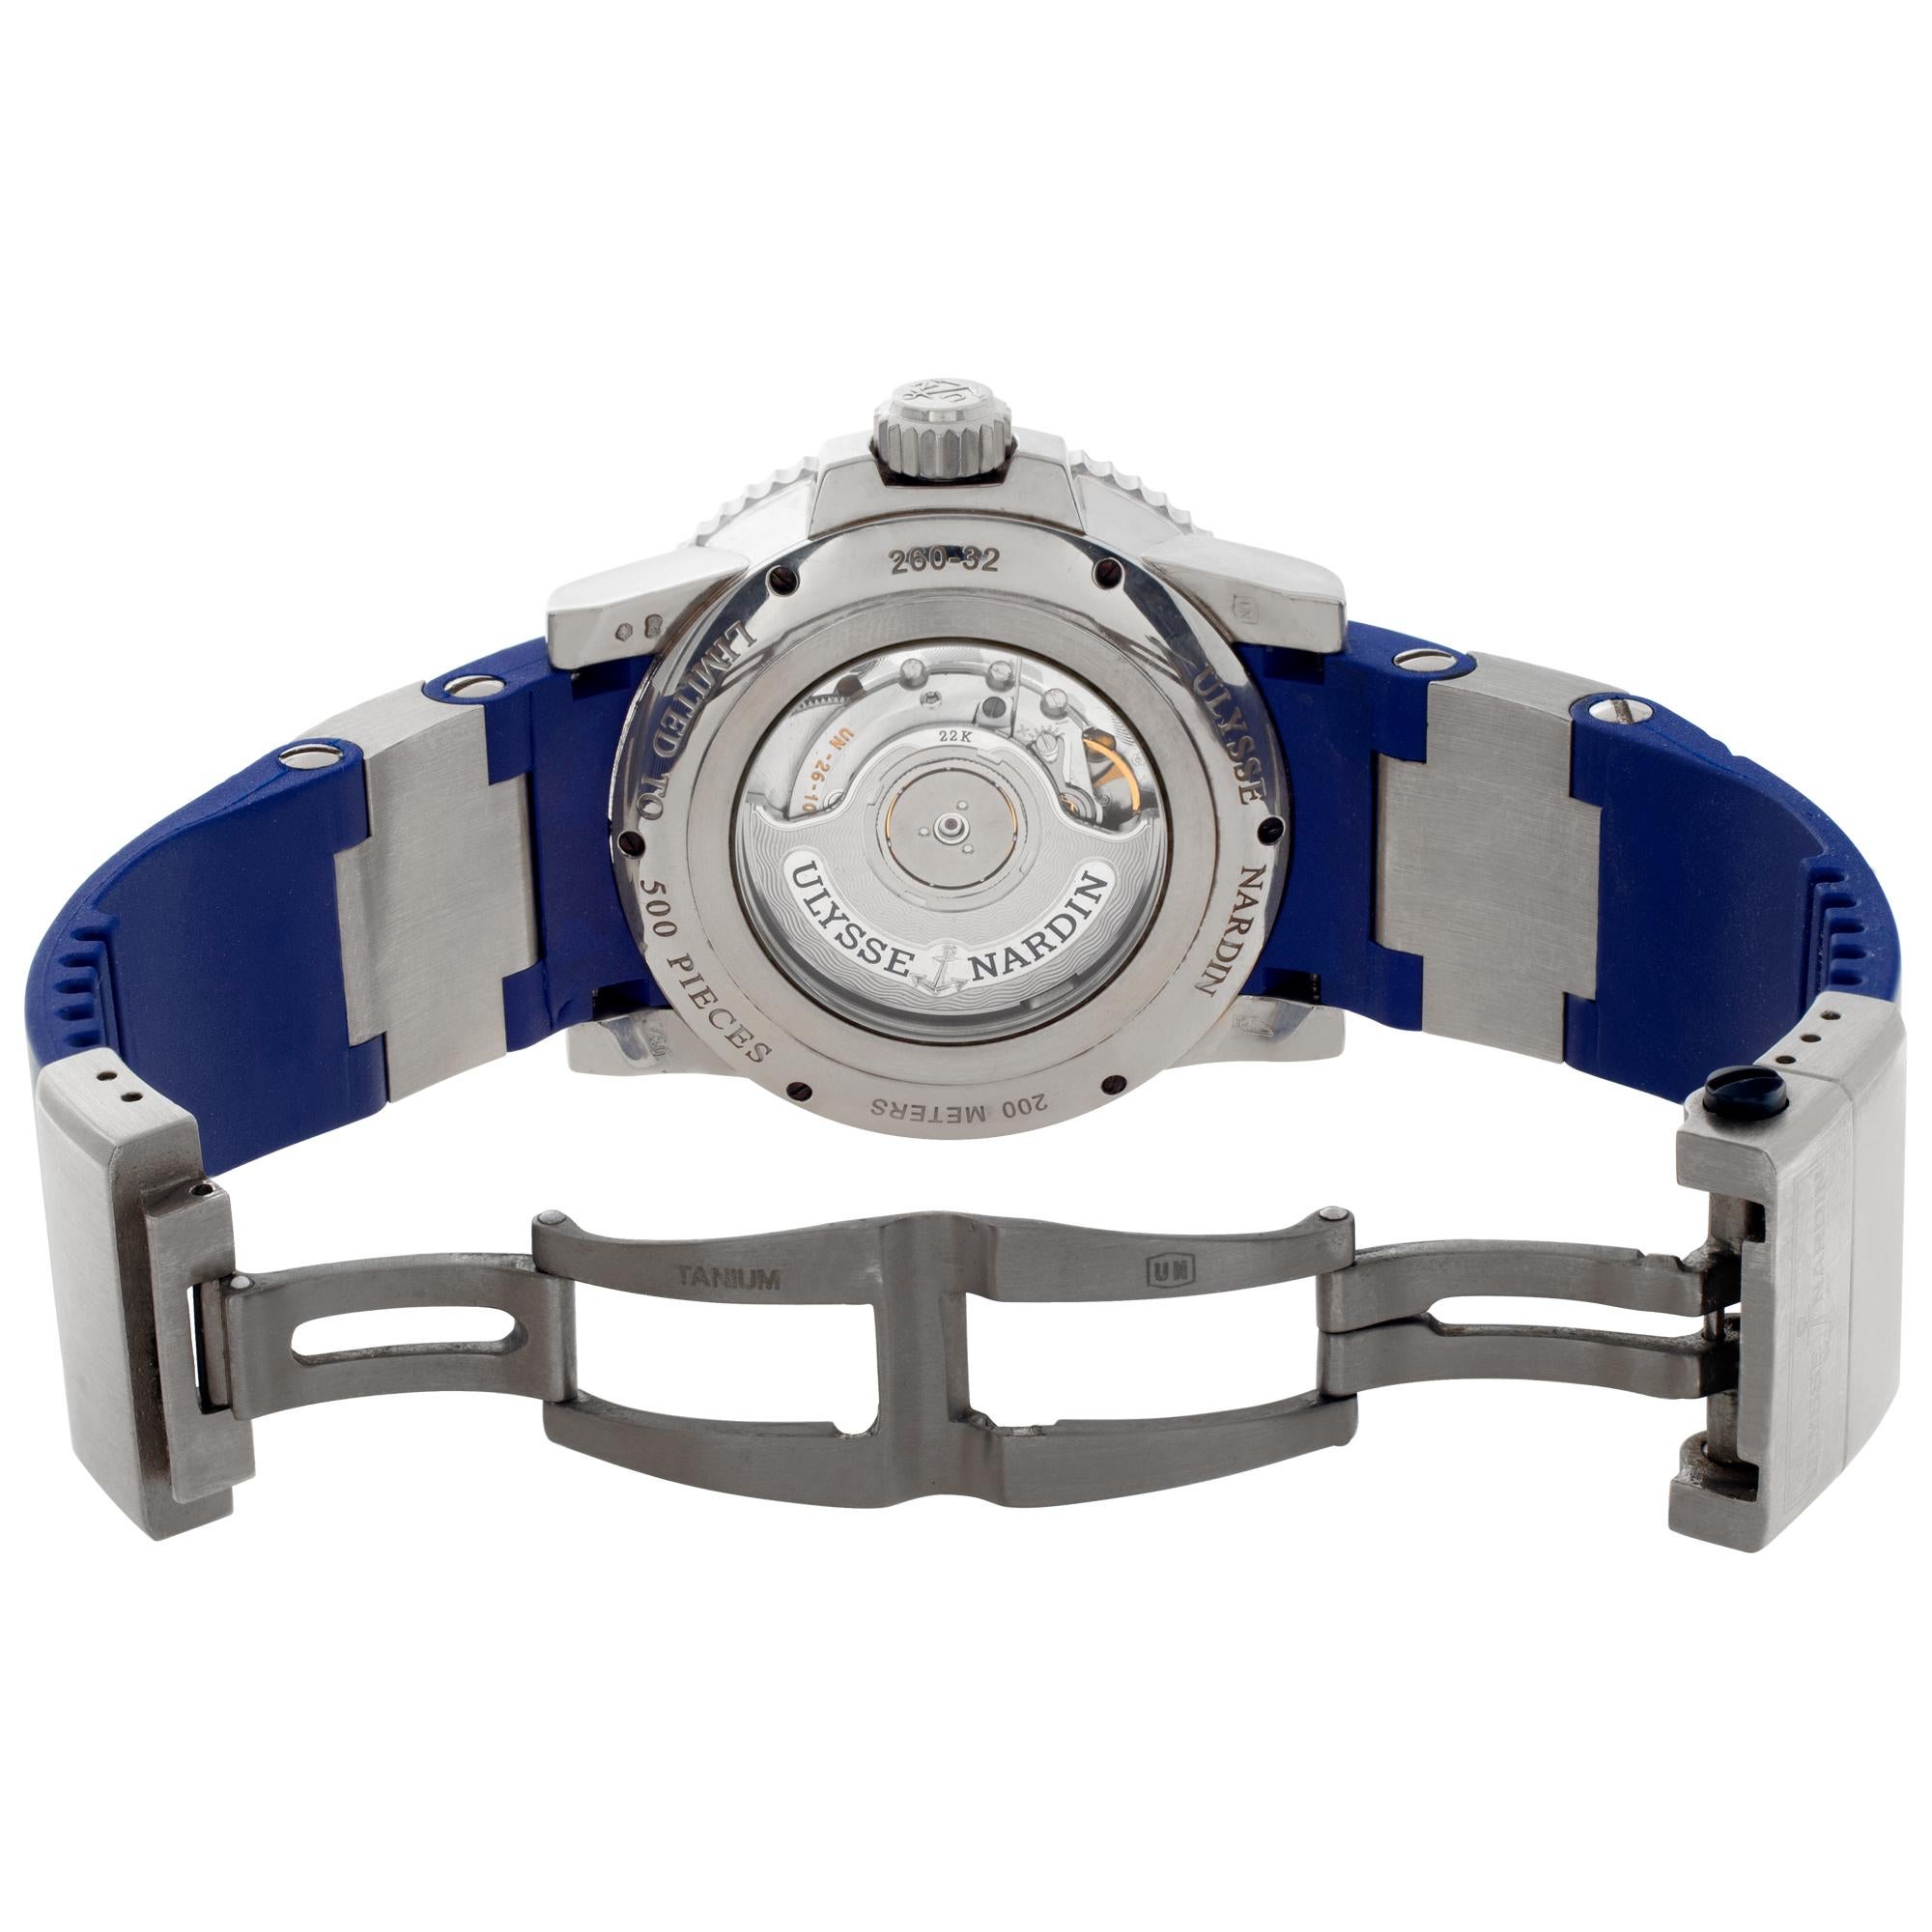 Men's Ulysse Nardin Marine 260-32-3a in White Gold with a Blue dial Automatic watch